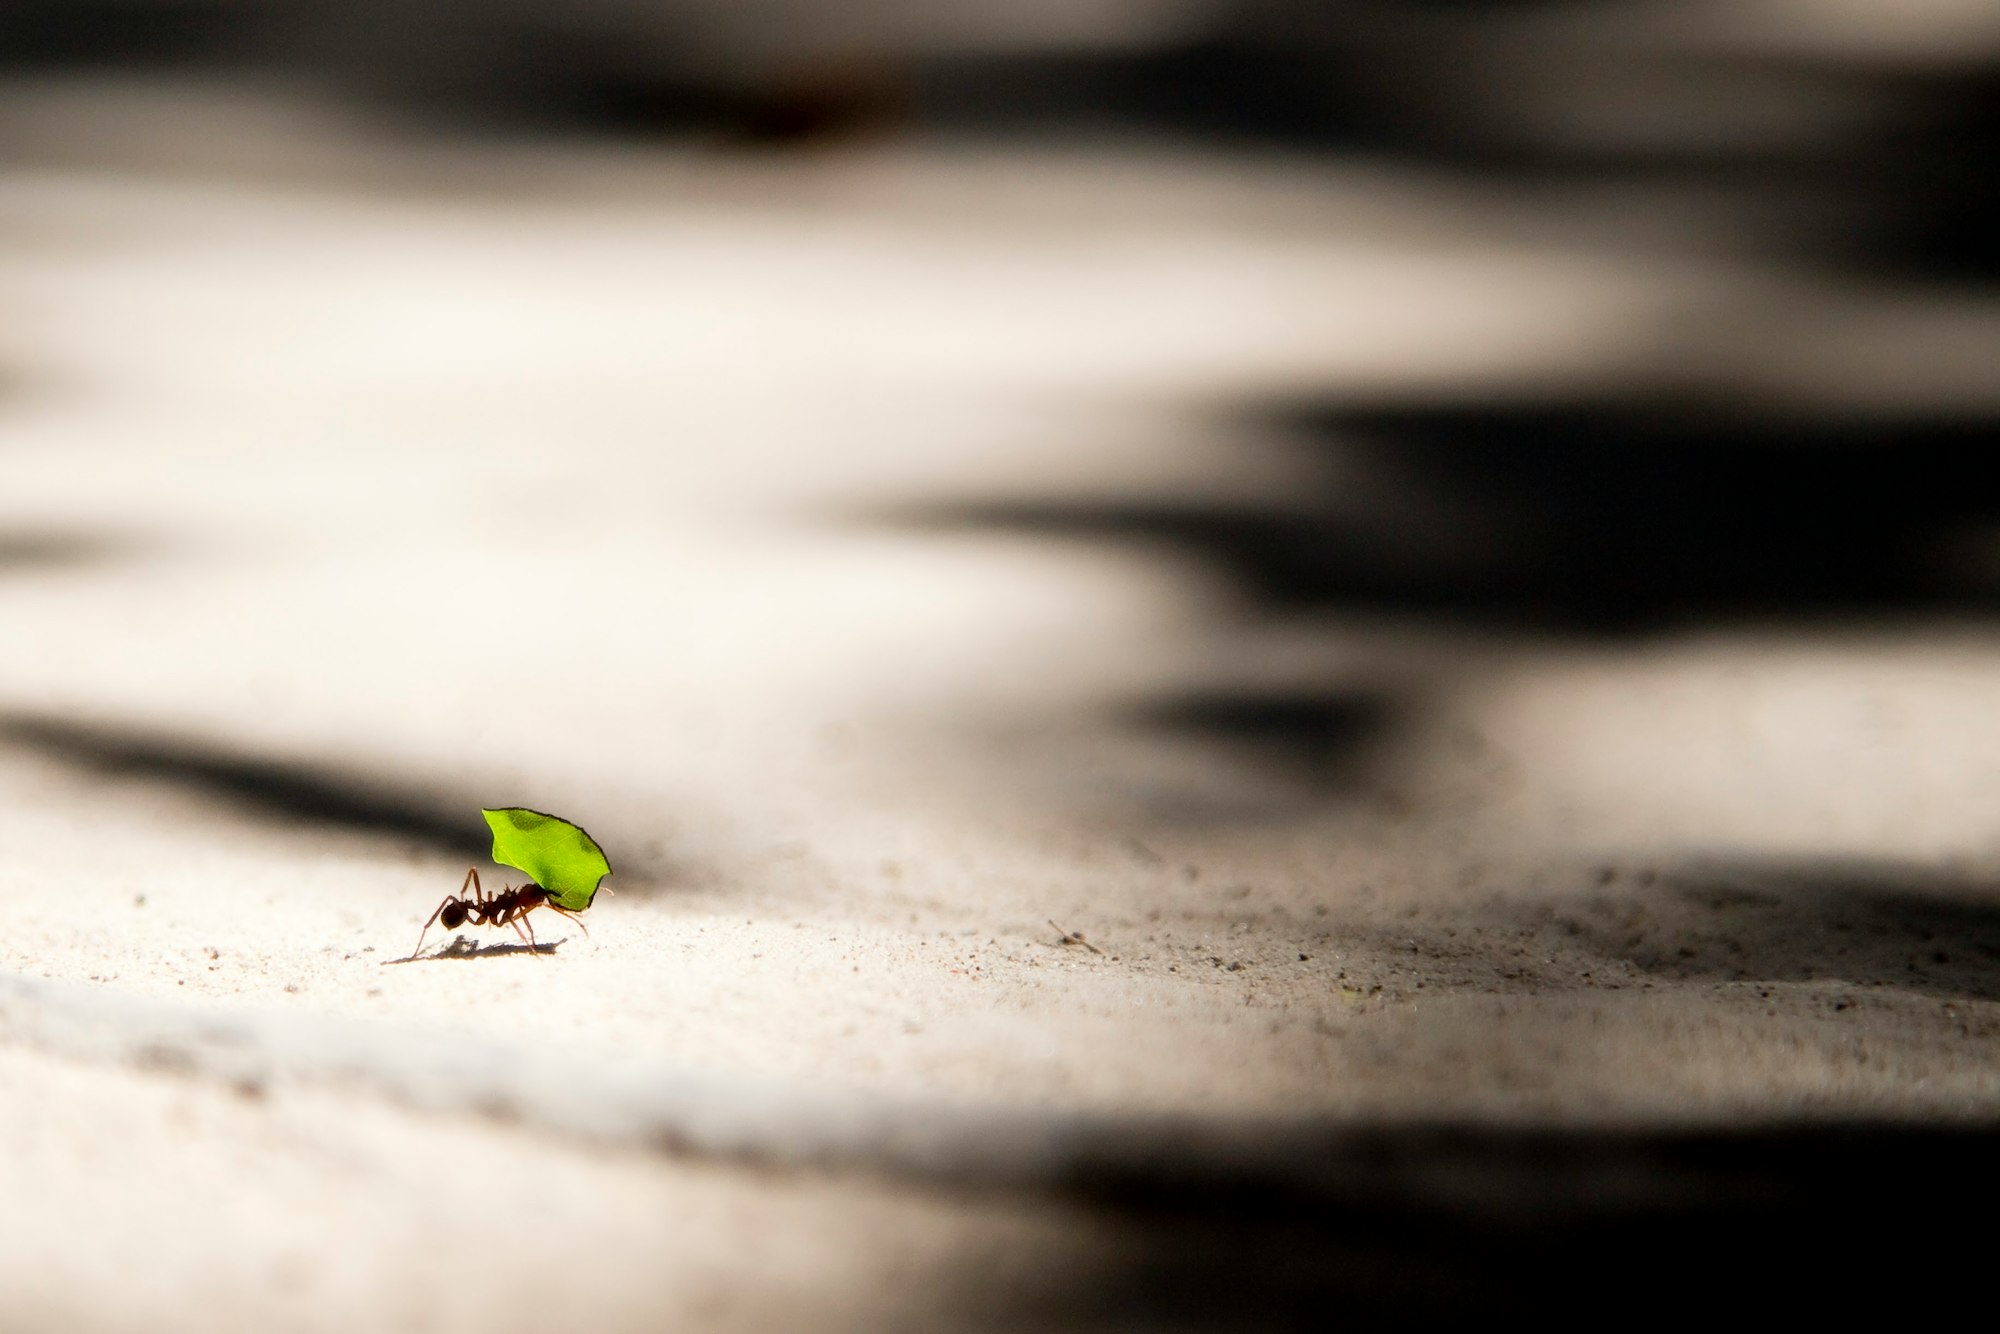 An ant carries a leaf across an otherwise-deserted concrete floor.